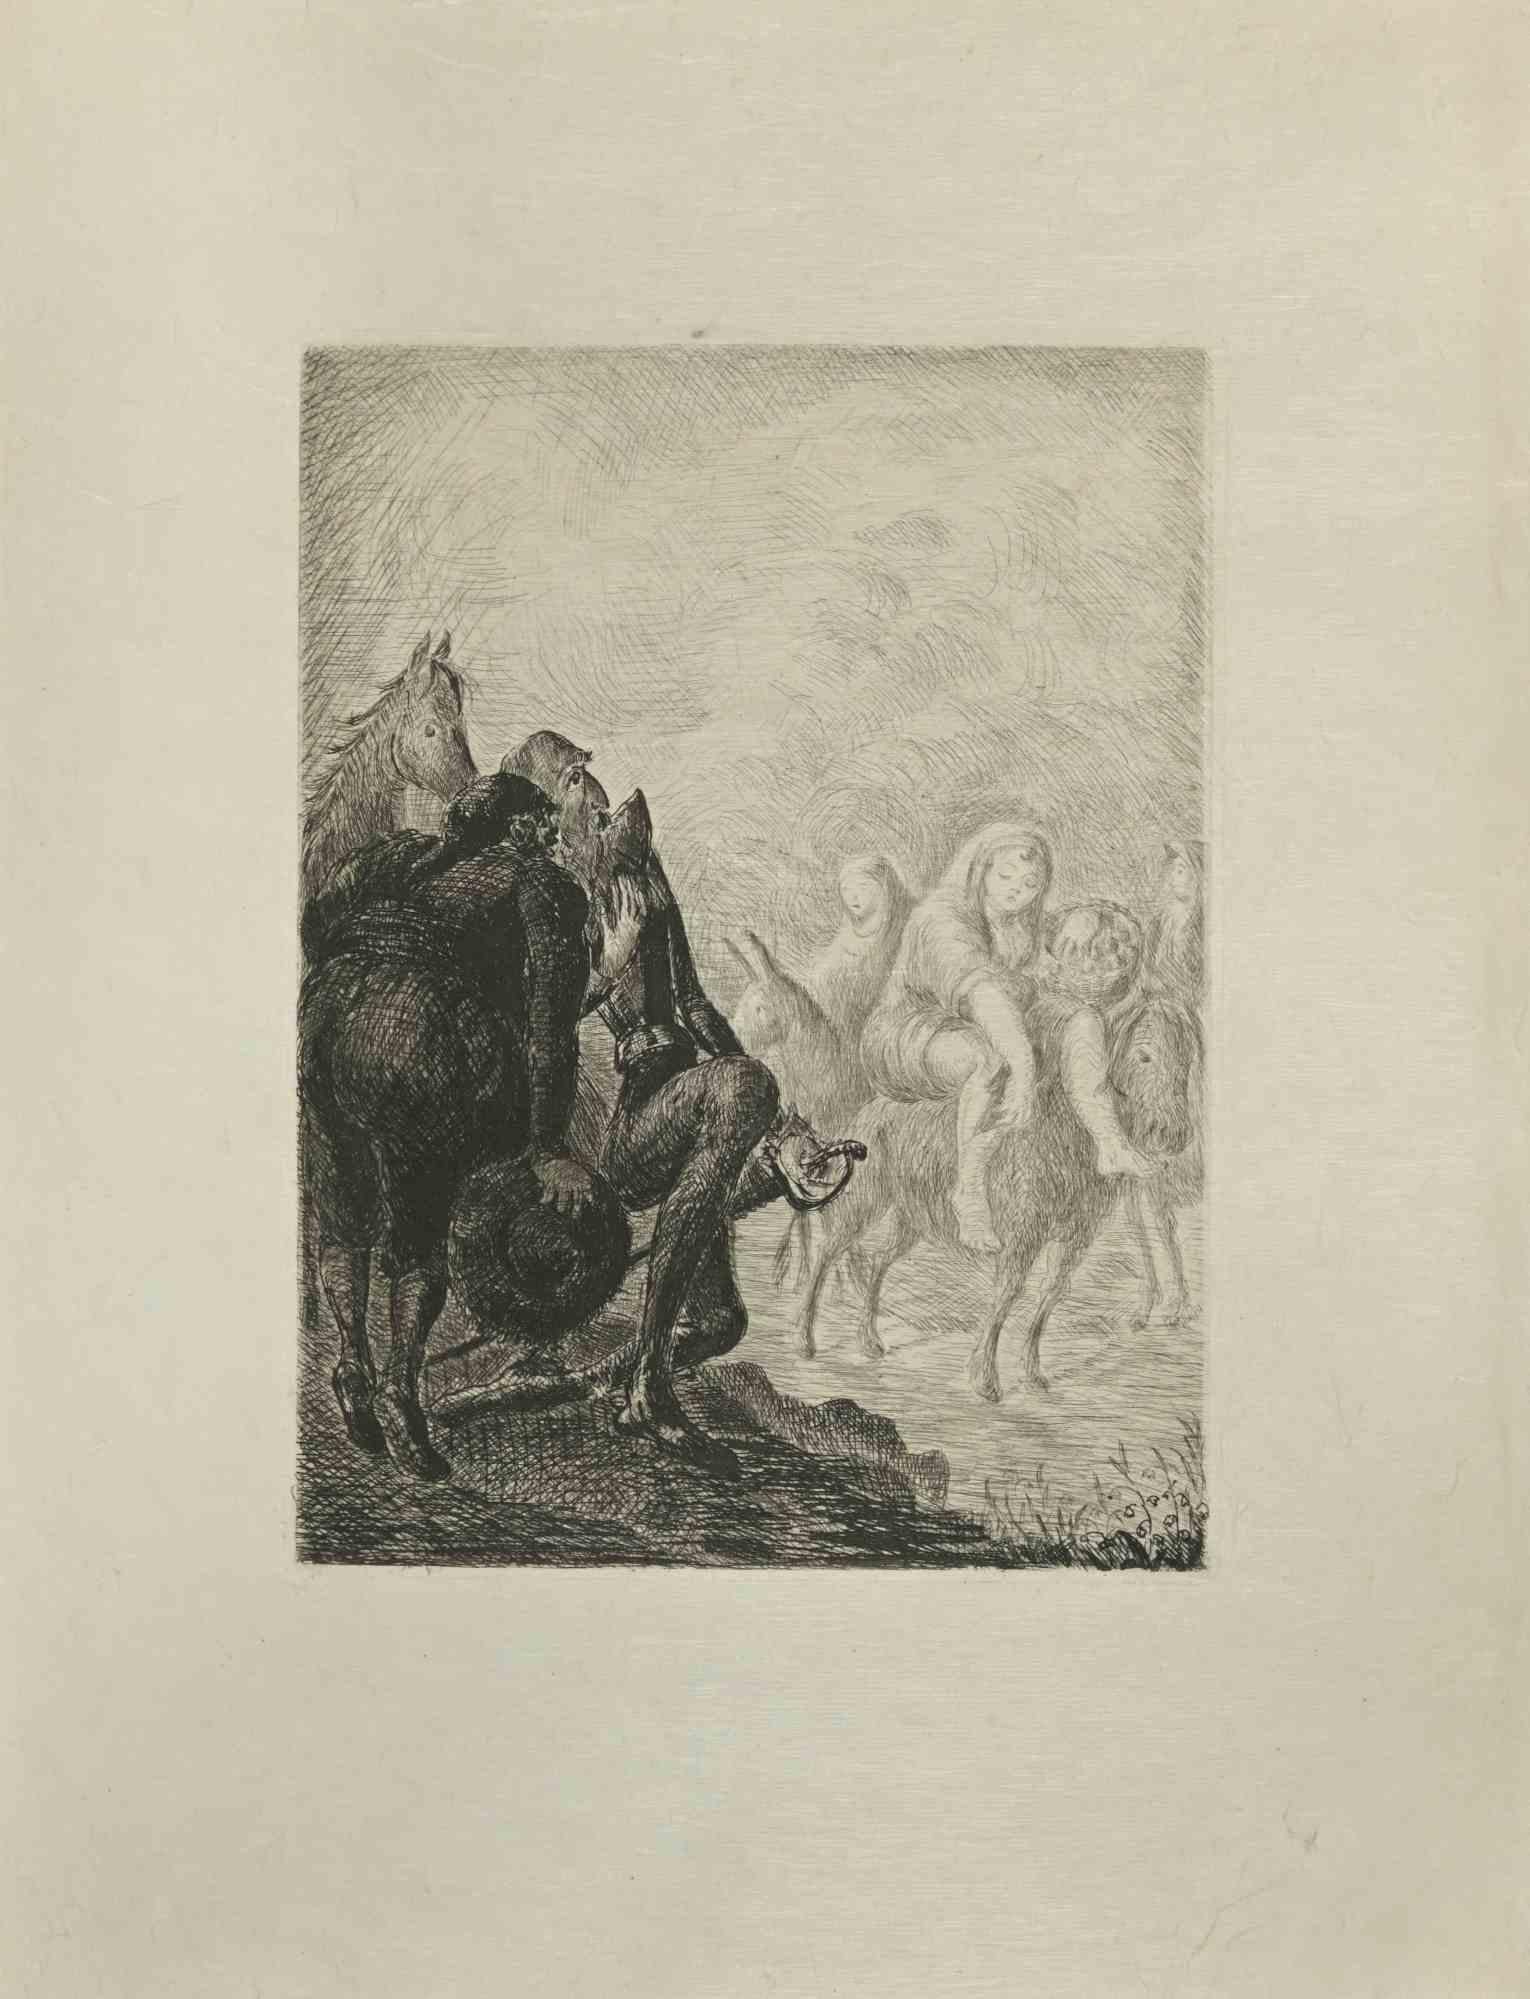 Don Quixote Observing is an etching and drypoint print on ivory-colored Japanese paper, realized by Wladyslaw Jahl in 1951.

It belongs to a limited edition of 125 specimens.

Good conditions.

The artwork represents a visual scene from Don Quixote